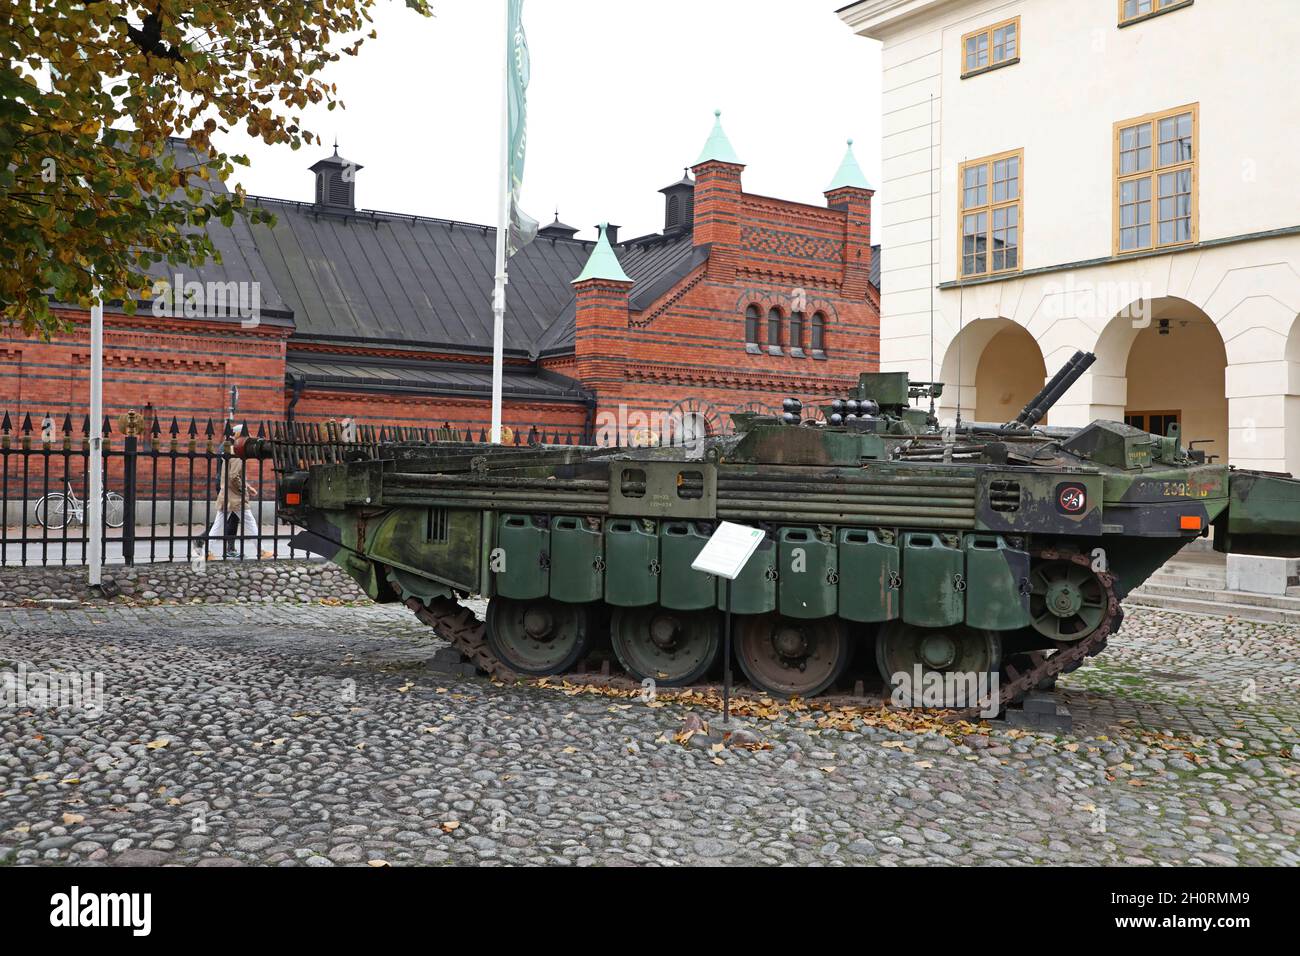 The Stridsvagn 103 (Strv 103), also known as the S-Tank outside the Swedish Army Museum in Stockholm, Sweden, during Sunday afternoon. The Swedish Army Museum (Swedish: Armémuseum) is a museum of military history located in the district of Östermalm in Stockholm. Stock Photo